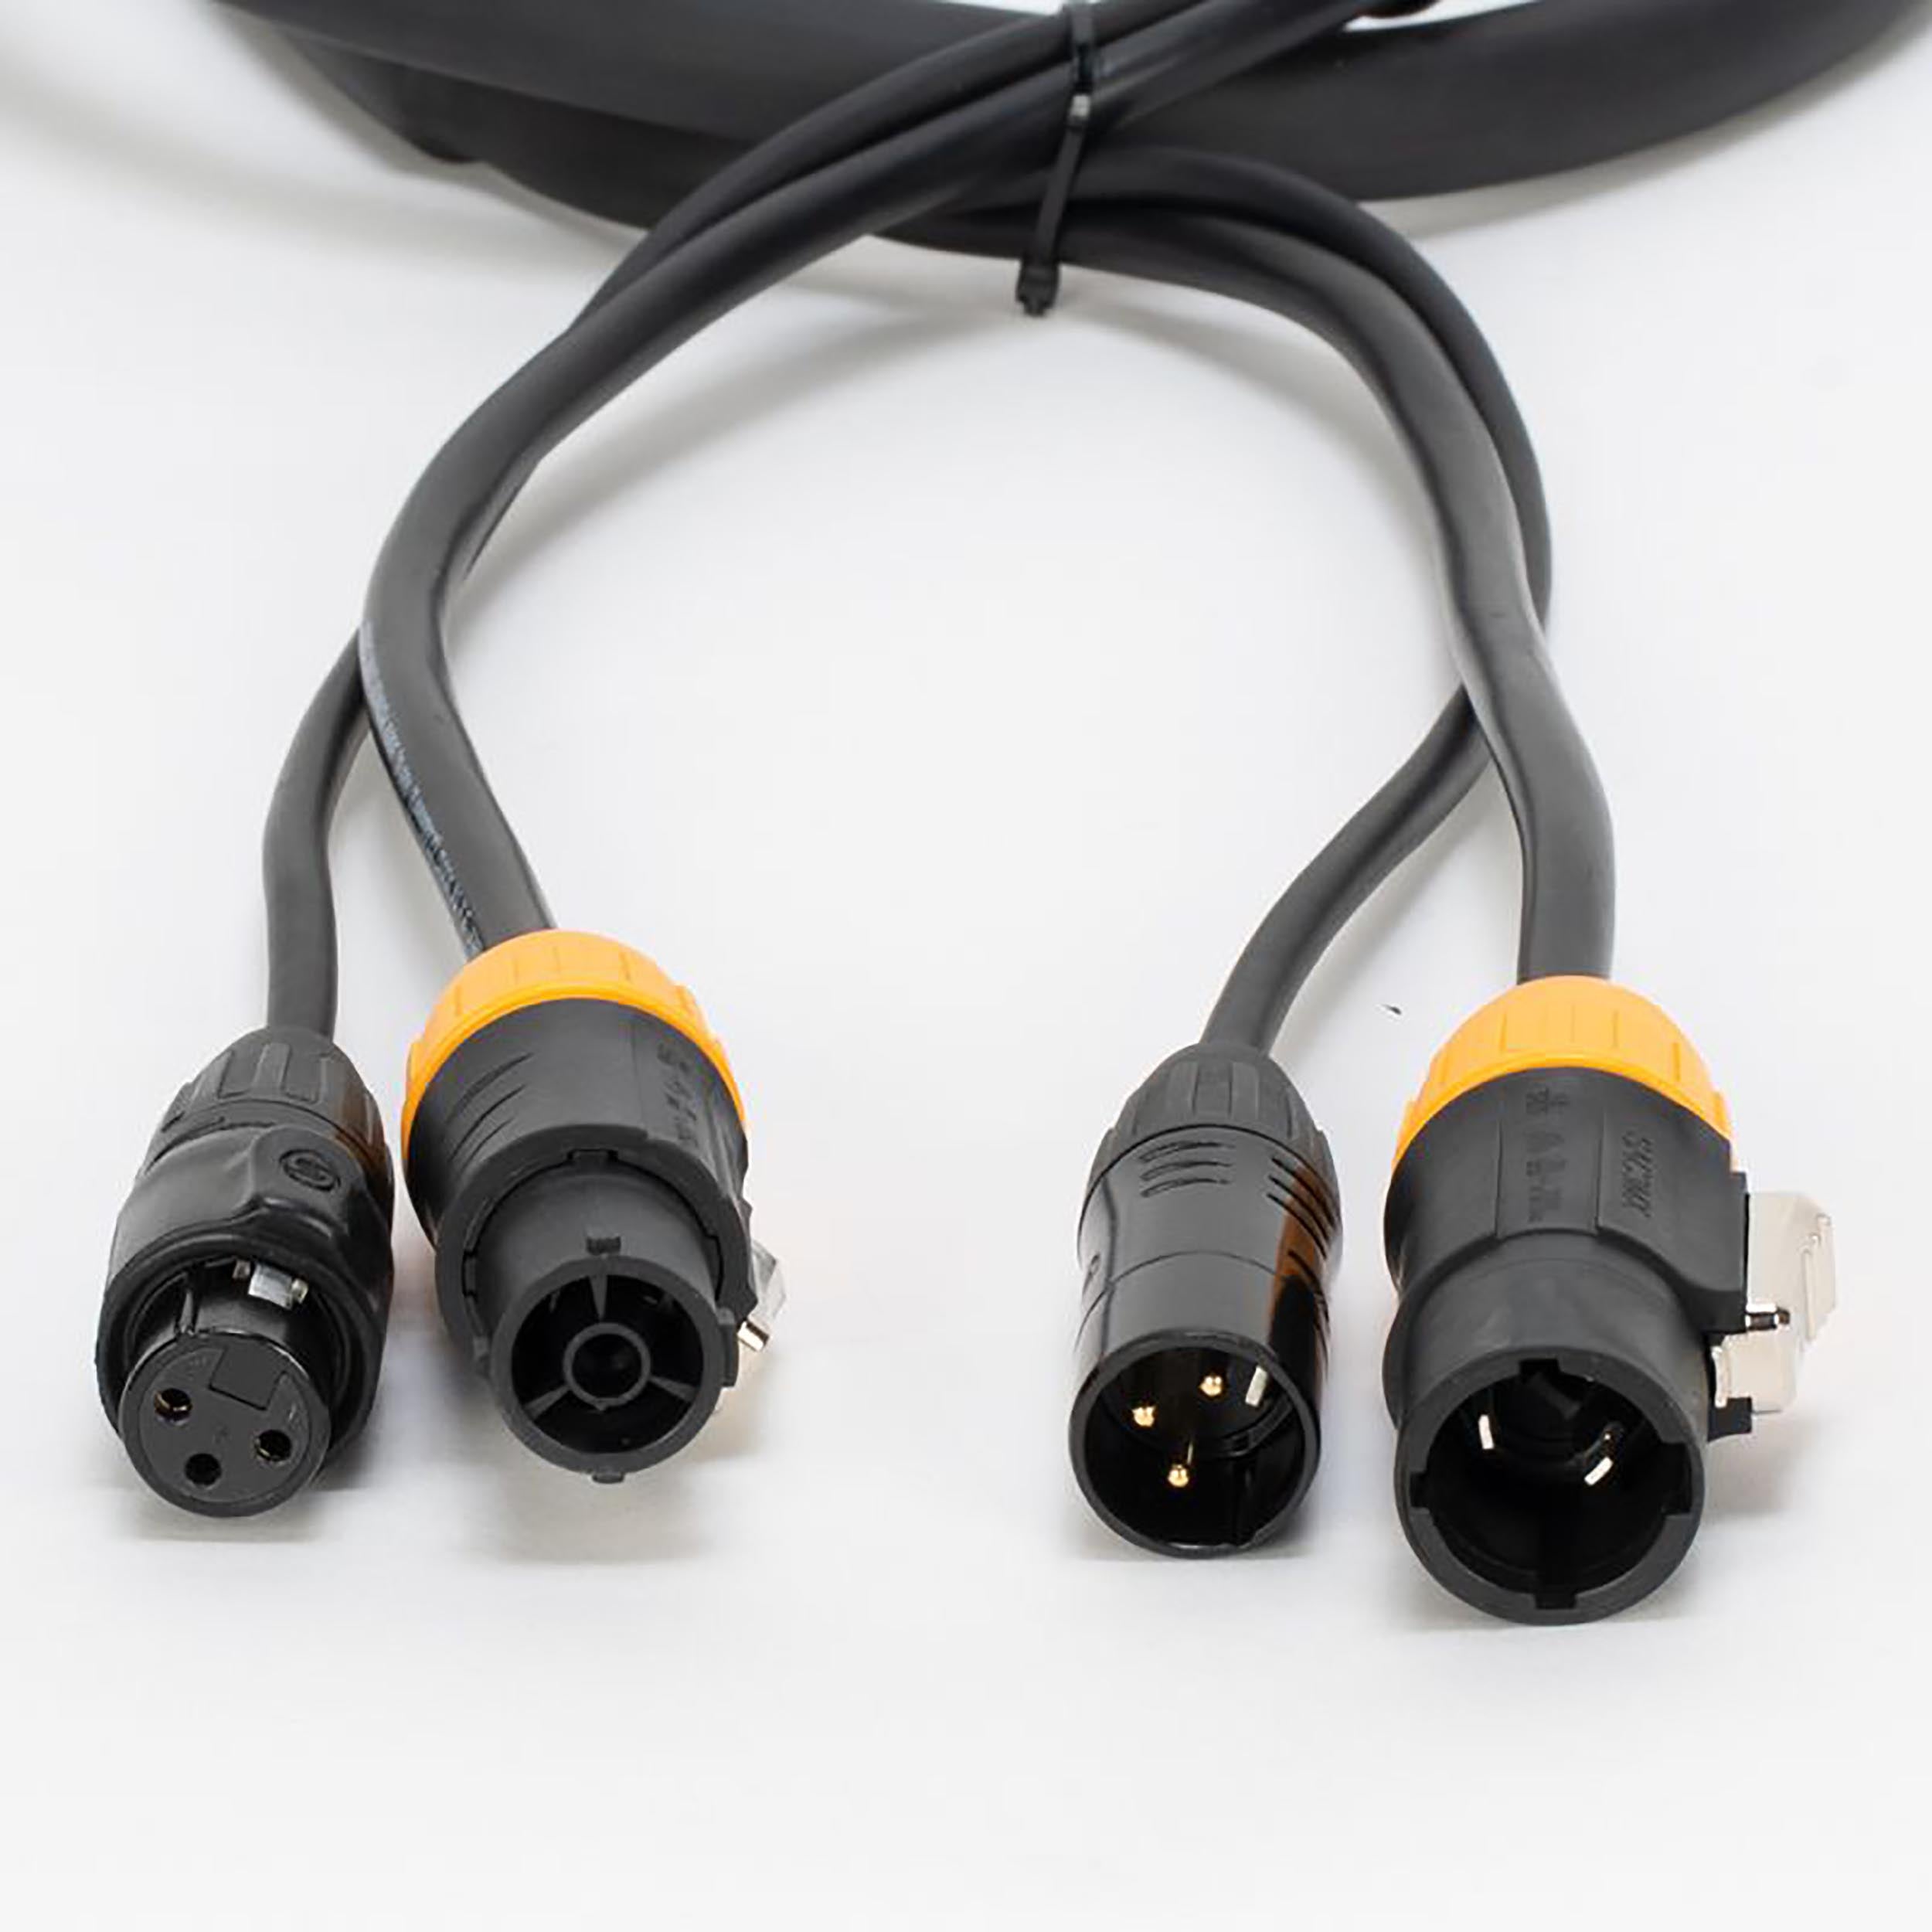 Accu-Cable AC3PTRUE, IP65-Rated 3-Pin DMX & Locking Power Link Combo Cable by Accu Cable